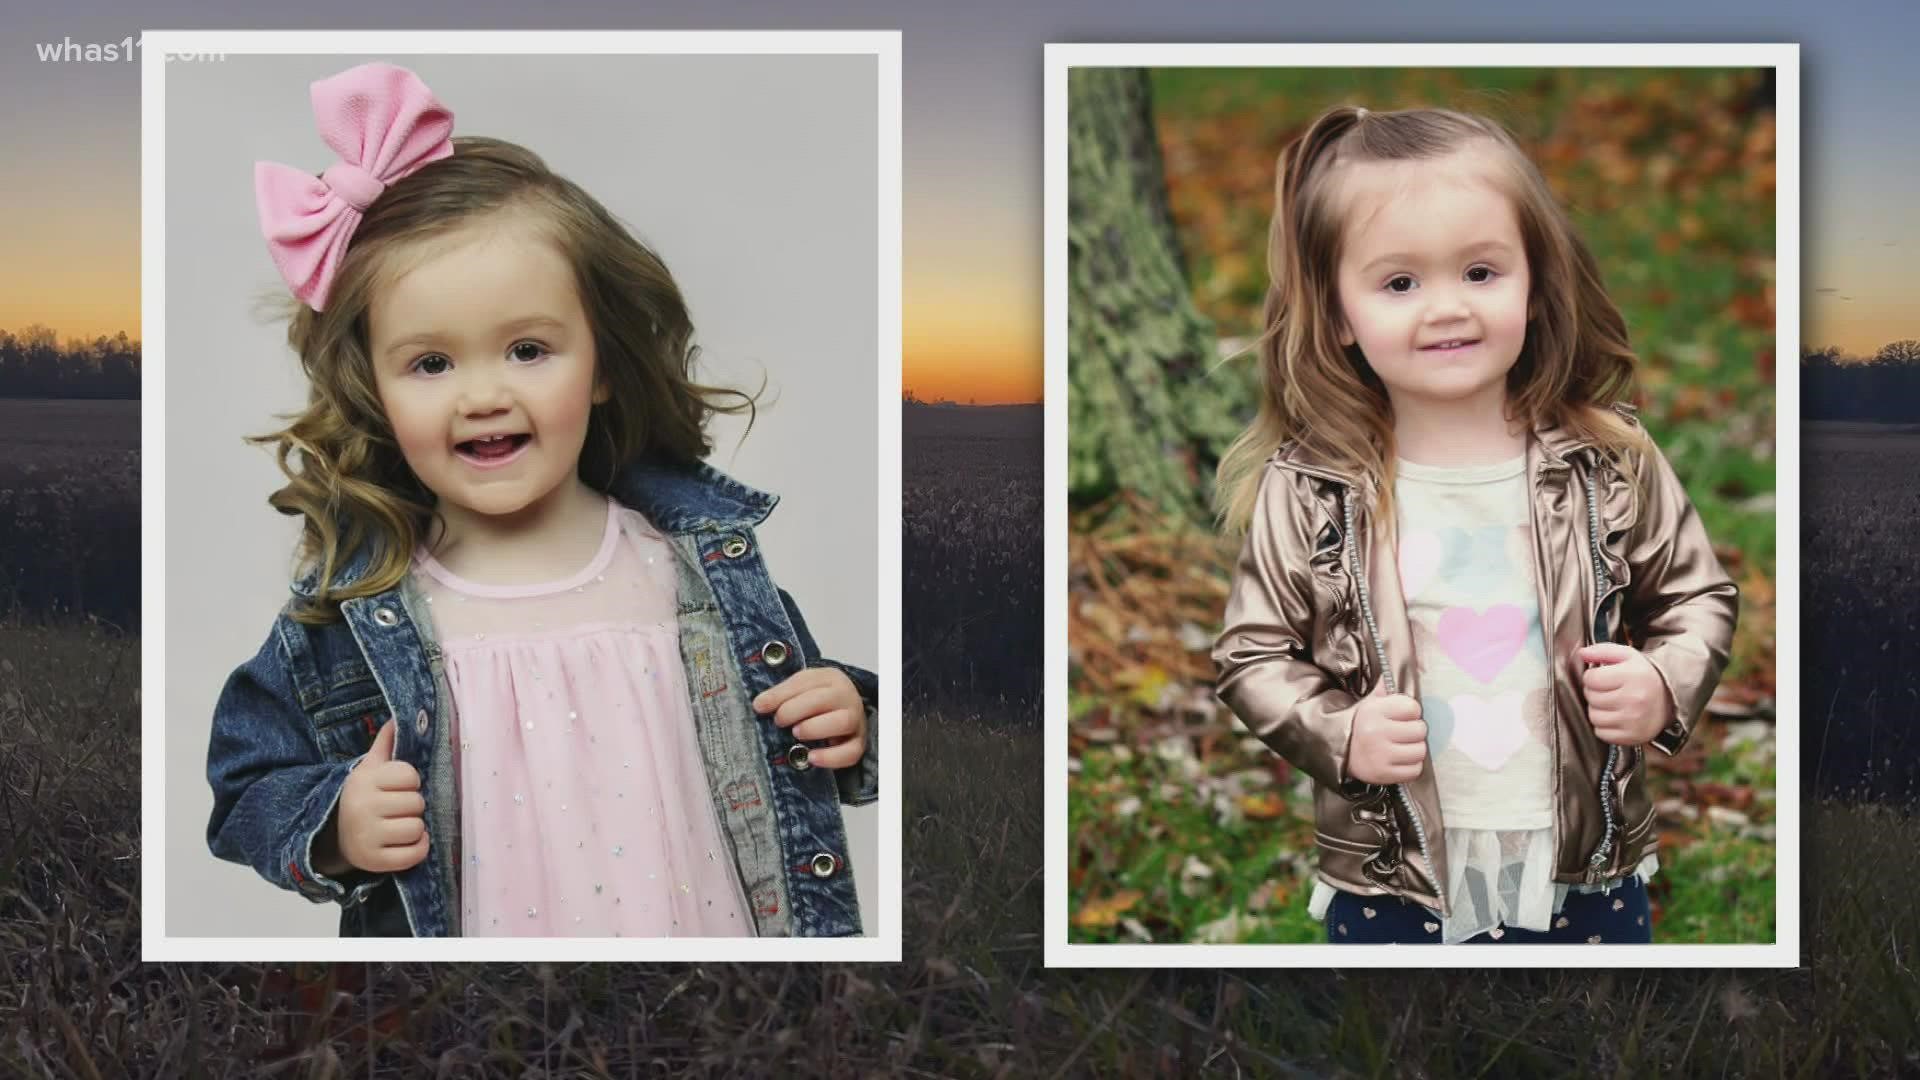 A diver found the body of 2-year-old Emma Sweet downstream from where her father's truck was submerged in the White River, Bartholomew Co. Sheriff Matt Myers said